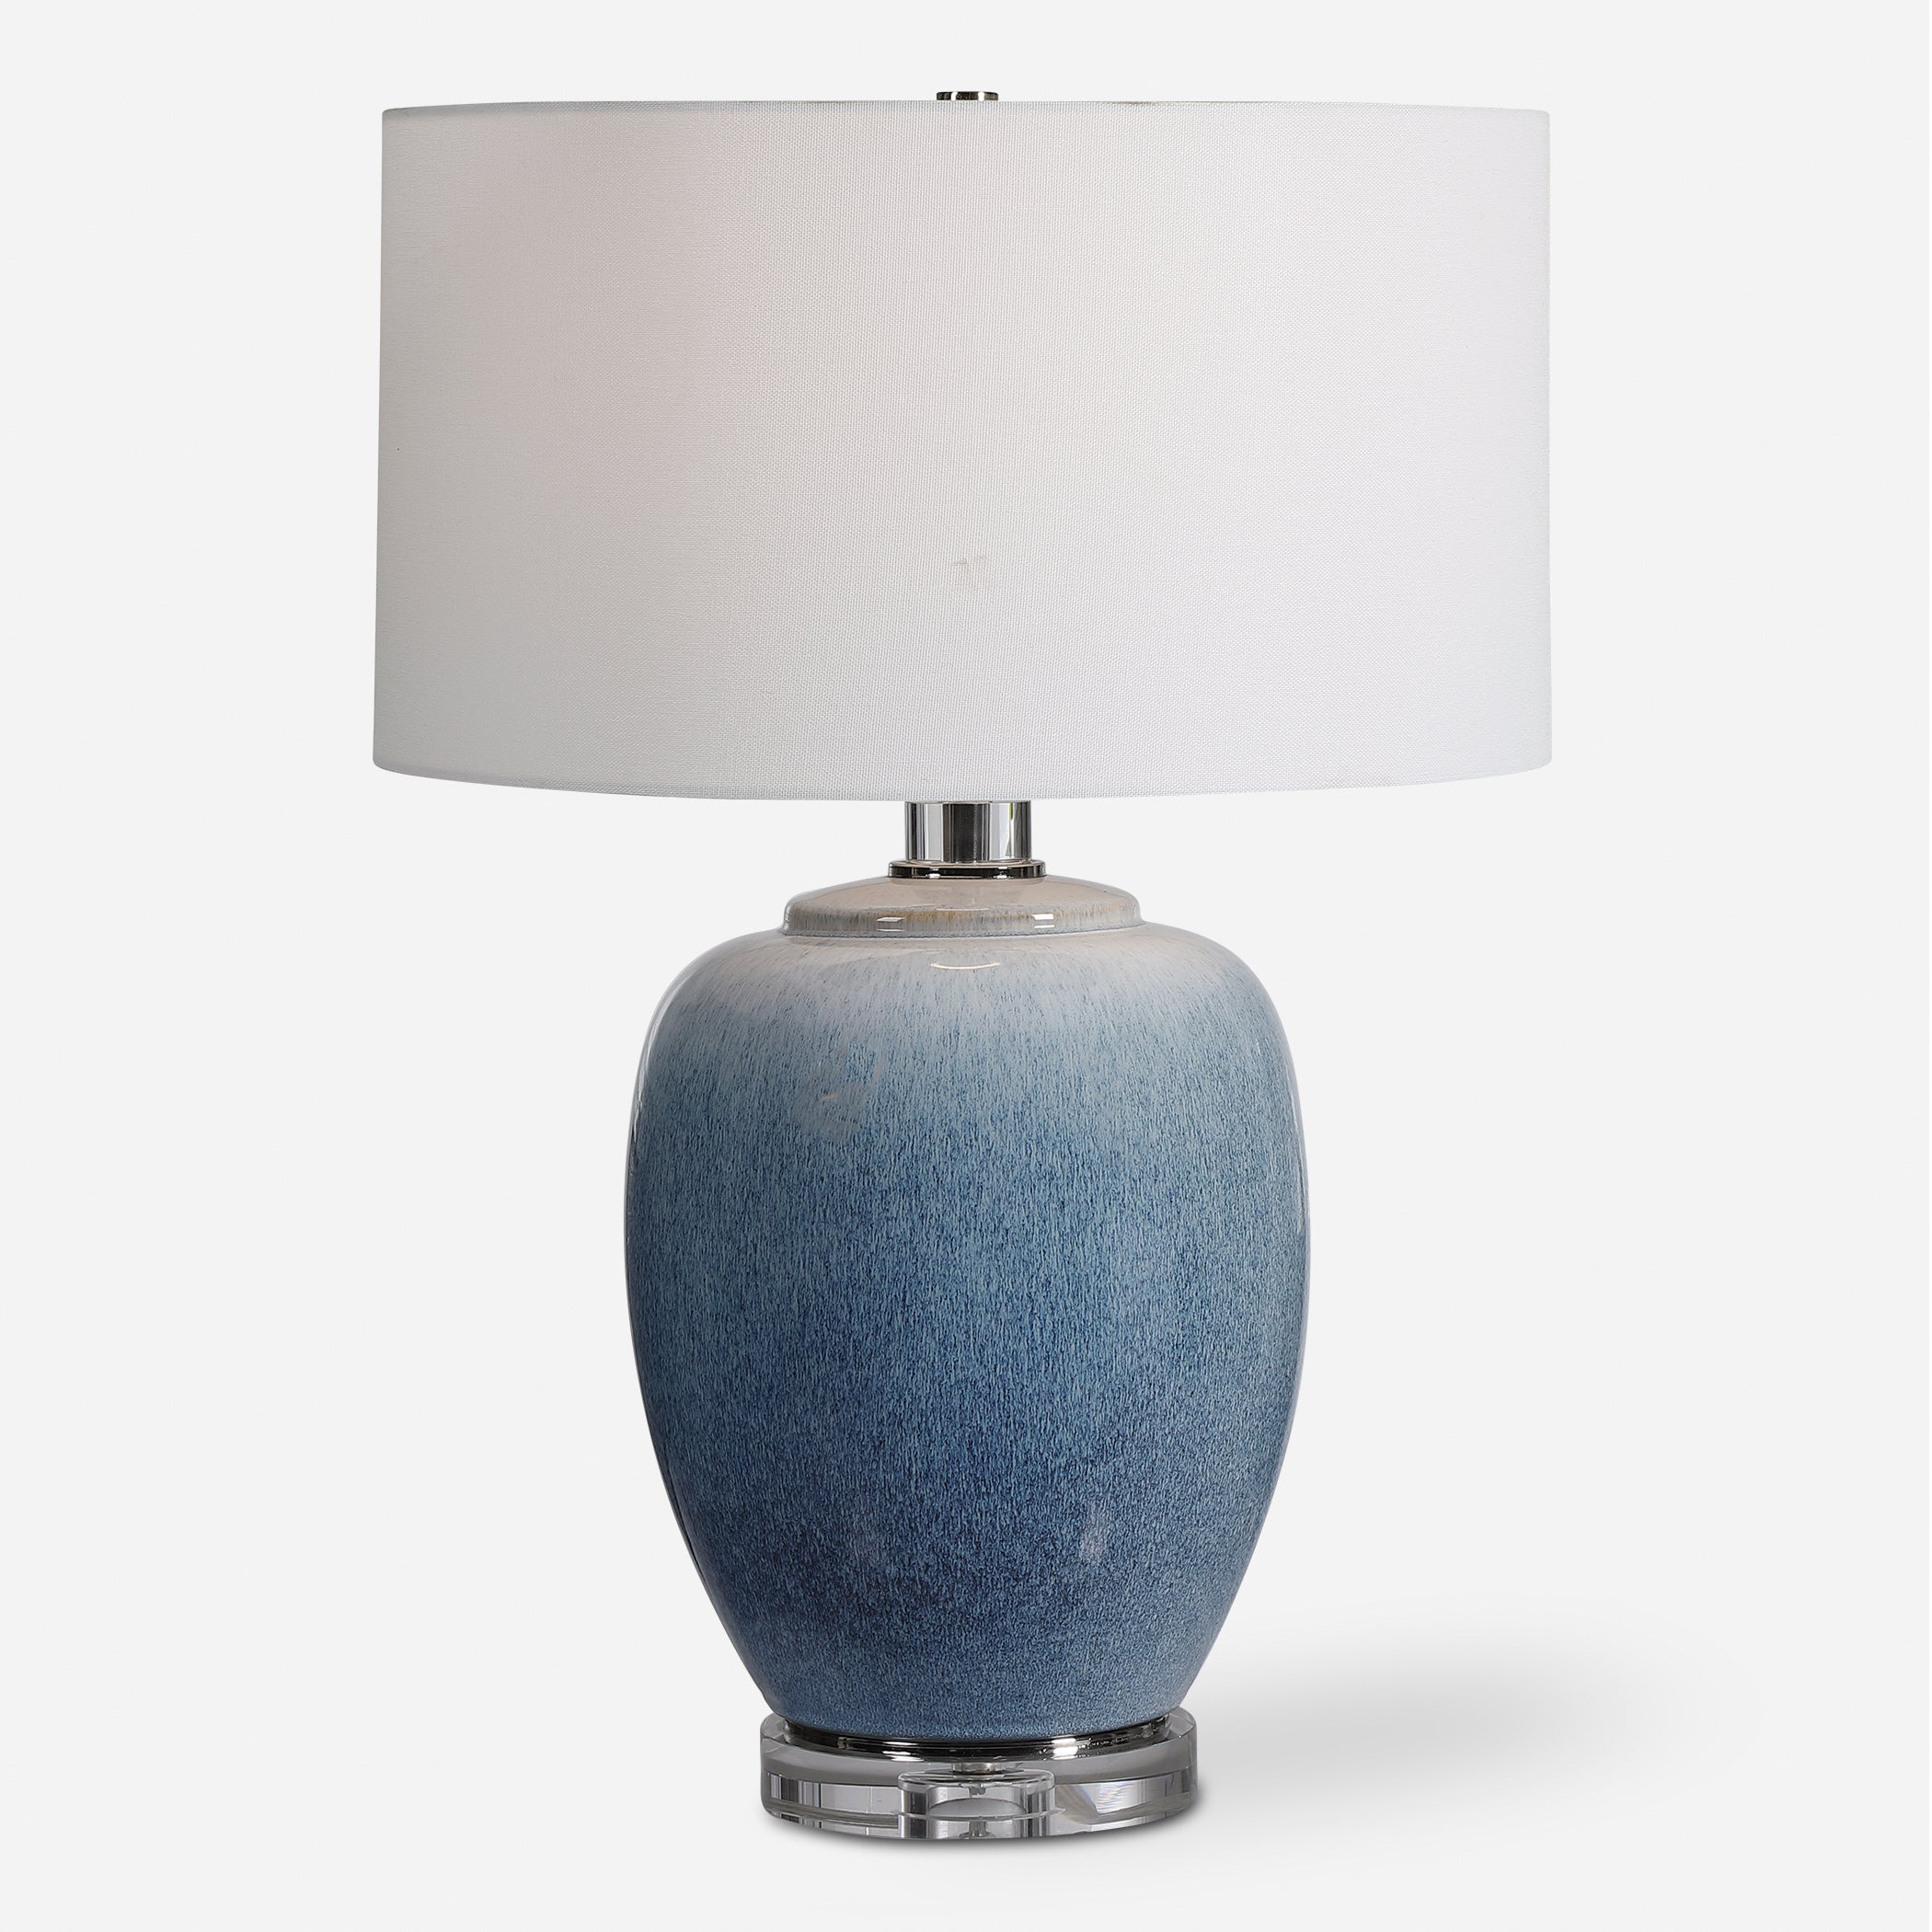 Uttermost Blue Waters Blue Ceramic Table Lamp Blue Ceramic Table Lamp Uttermost   